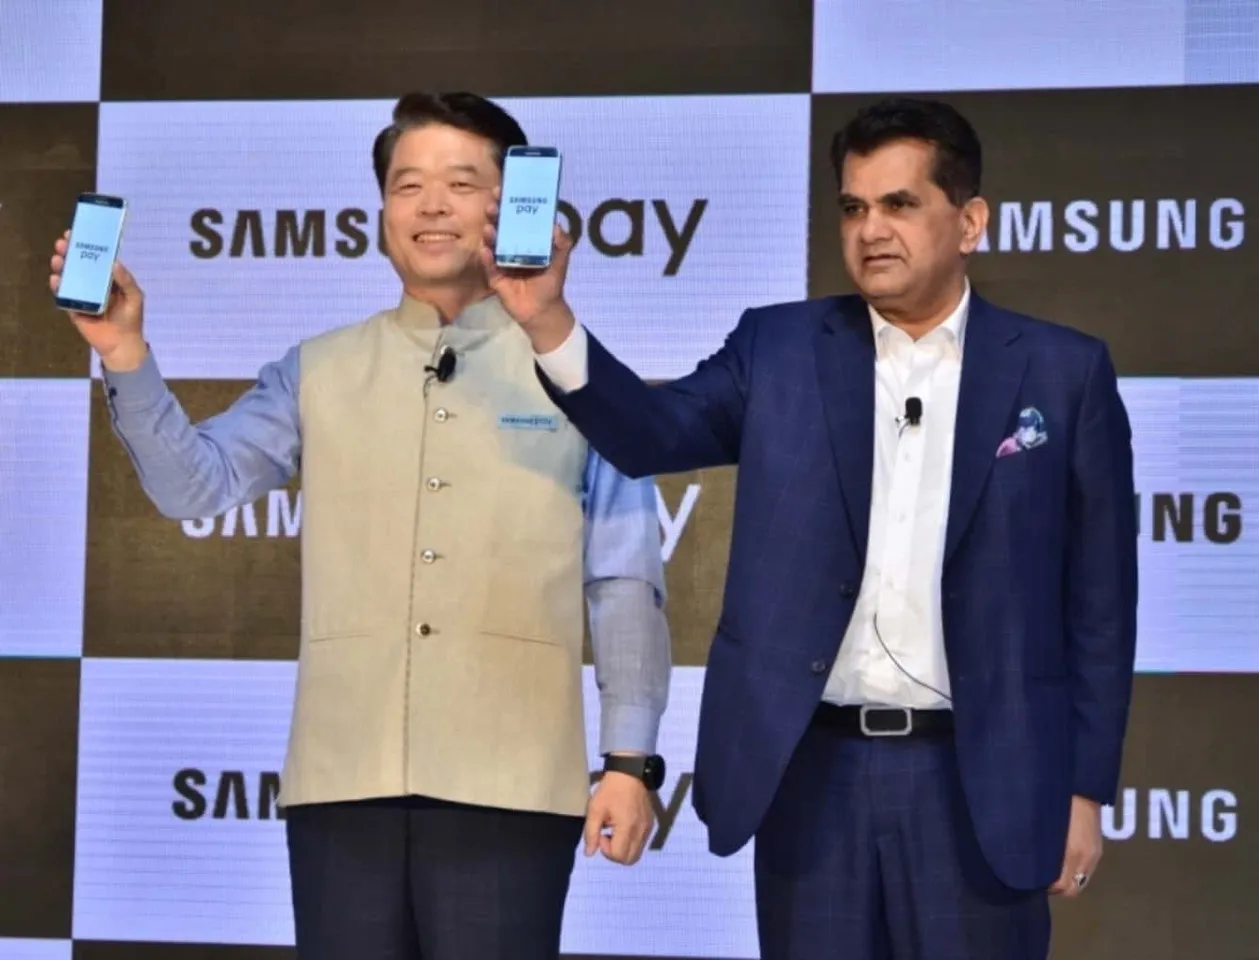 CIOL Samsung finally launches its mobile payments service, Samsung Pay in India